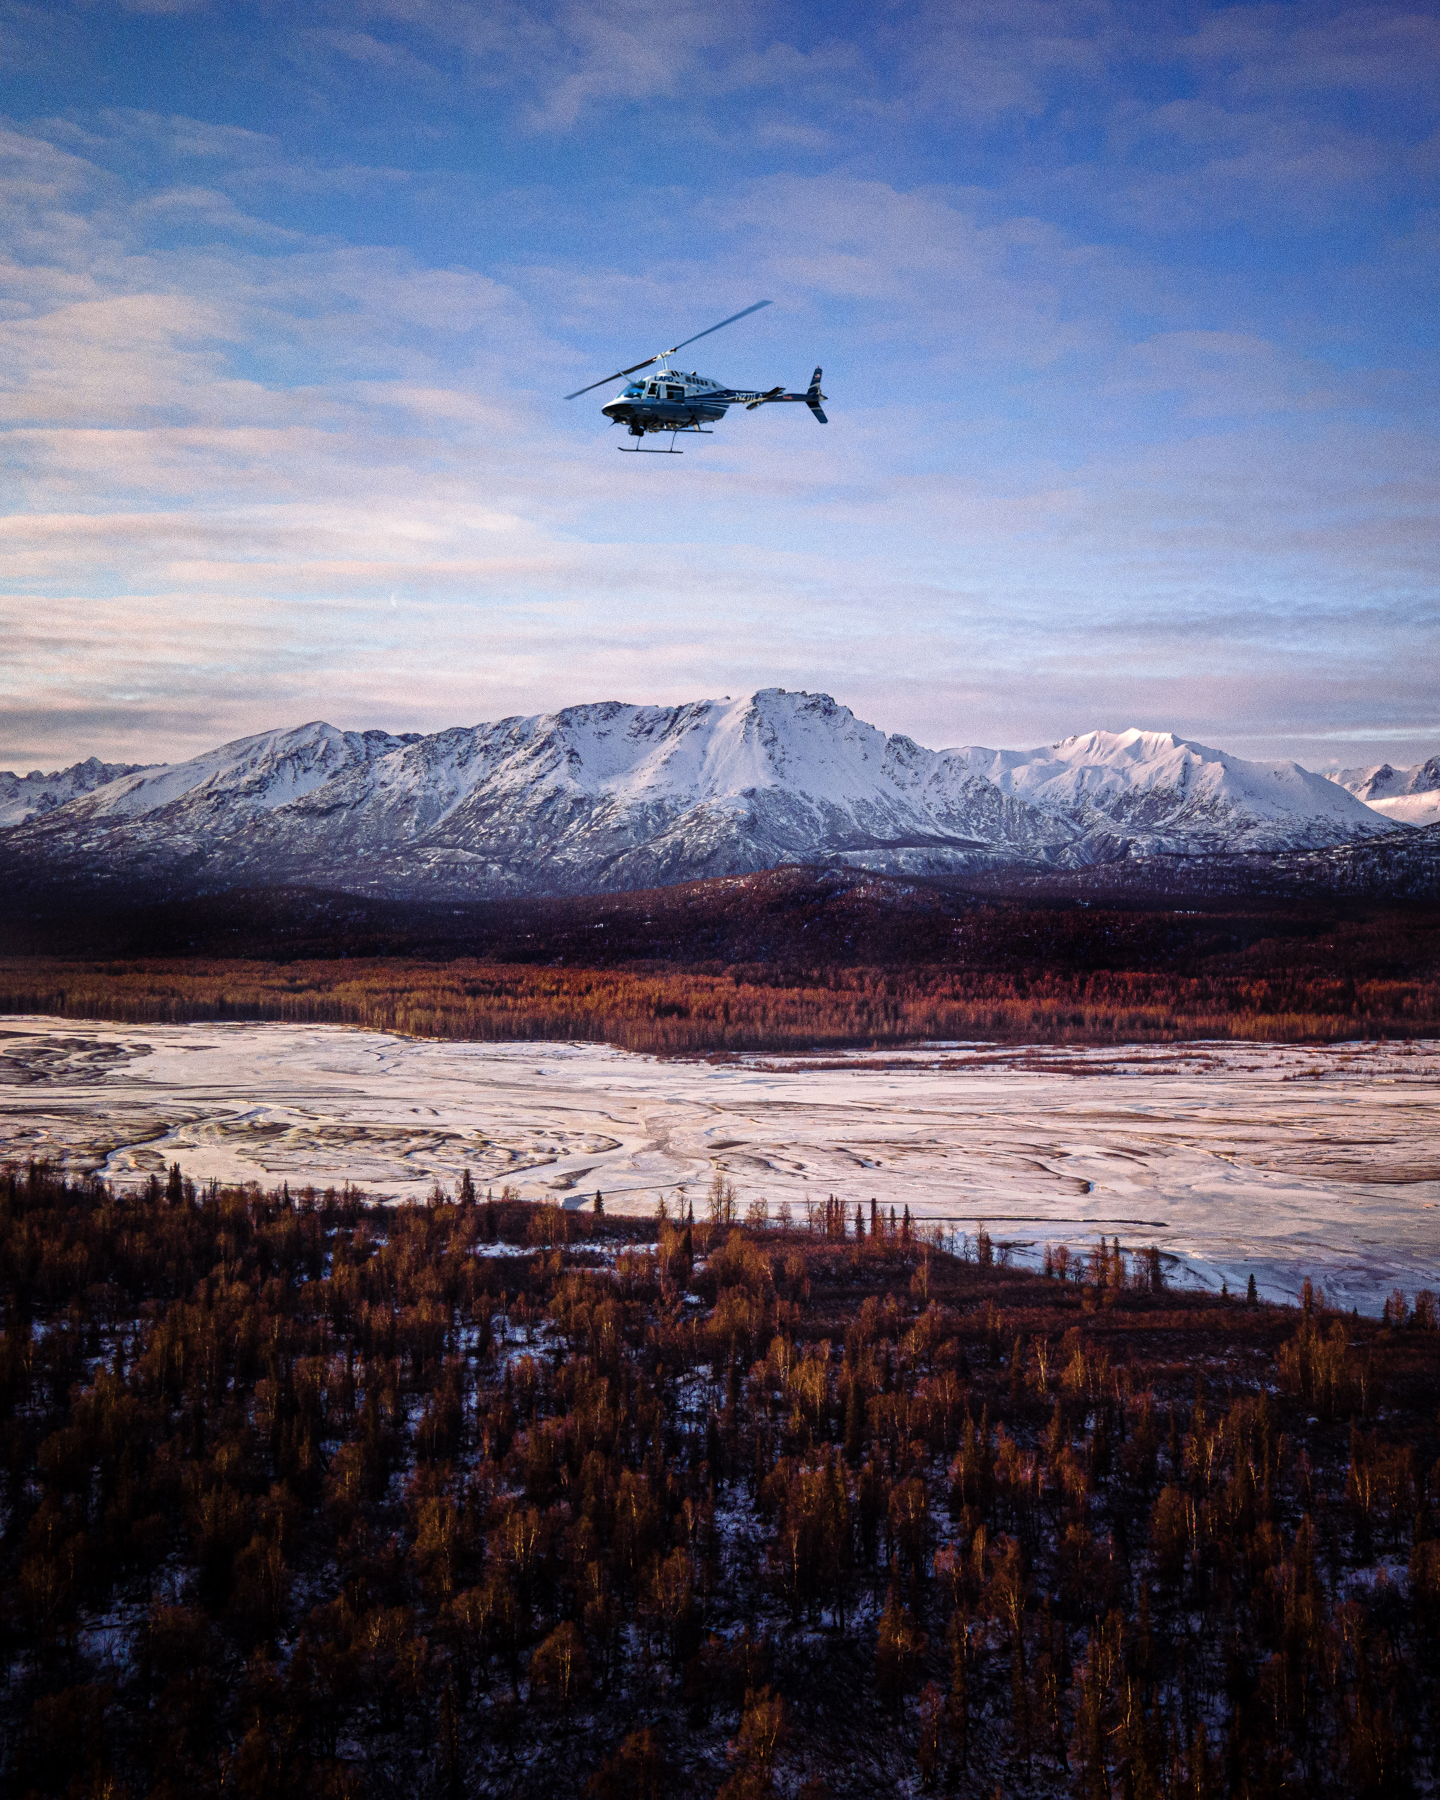 Bird Photobomb. "This image was taken in Denali National Park, Alaska. I like to say “I tried to take a picture and this bird got in the way”, referring to the heli." © Edgar Colindres, Guatemala, entry, Open Competition, Travel, 2023 Sony World Photography Awards